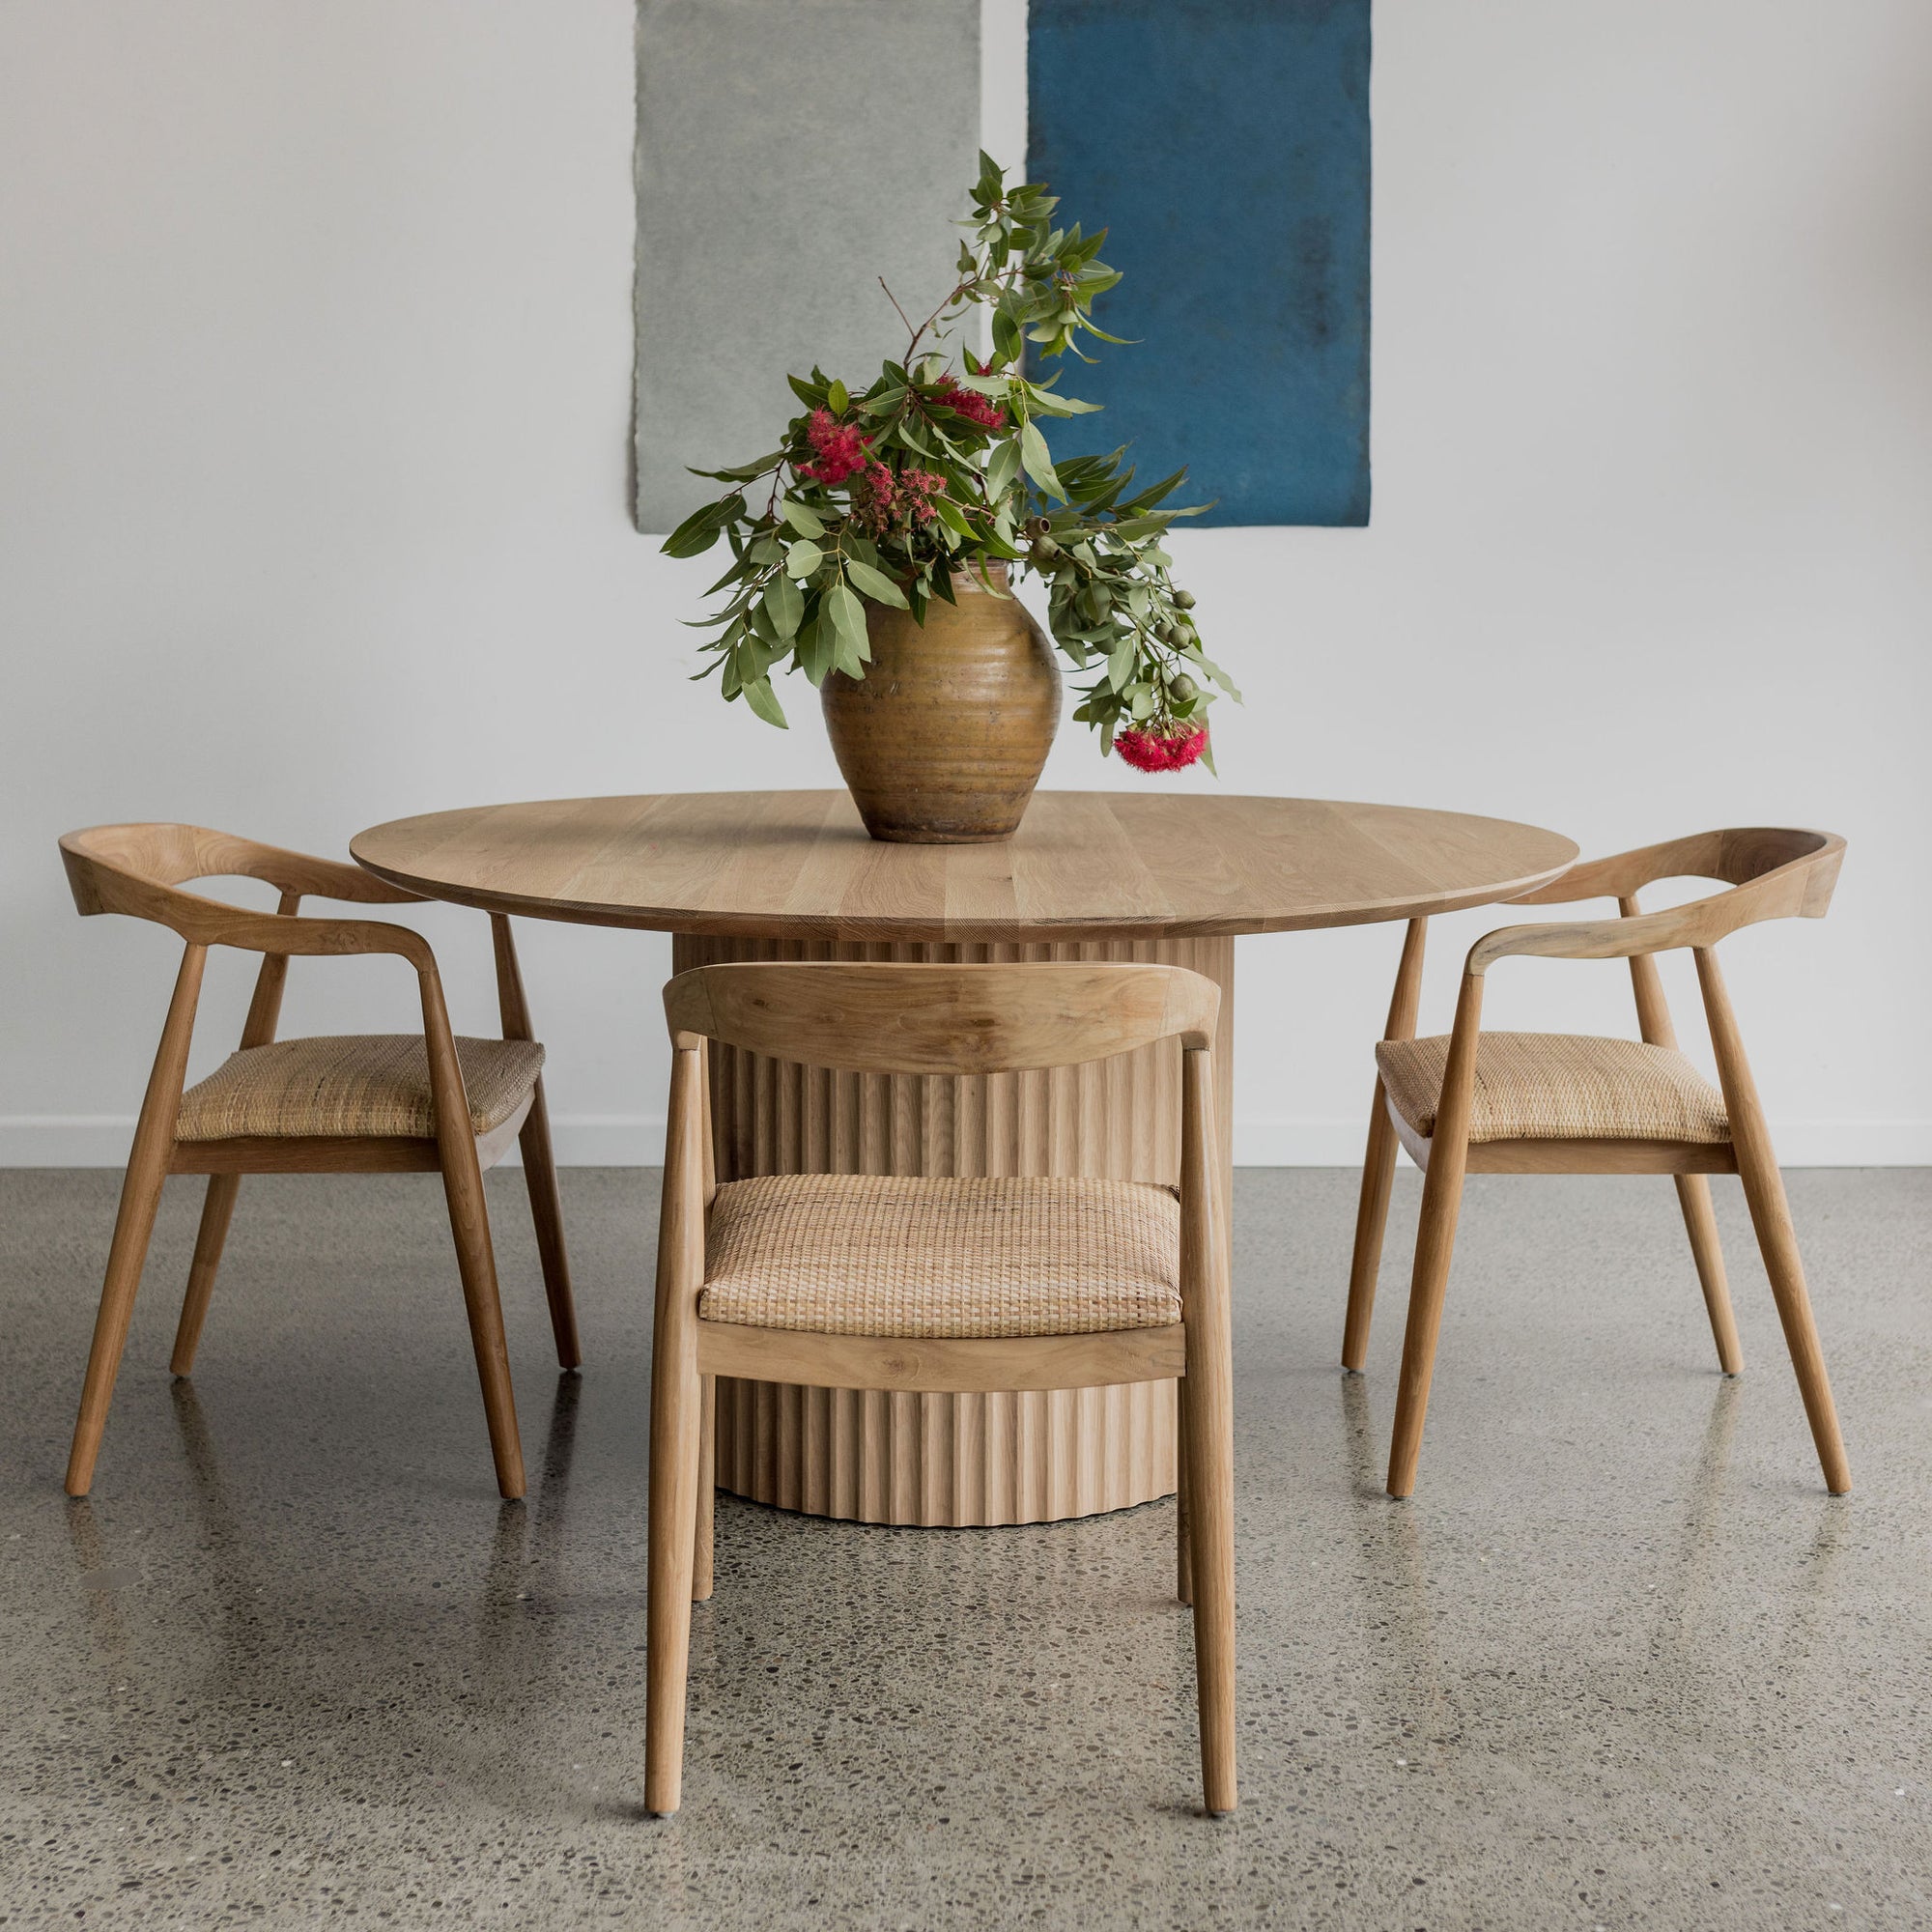 Delos Round Table is a stylish table design from corcovado furniture store online in new zealand and made in NZ and comes in small medium and large round pedestal table sizes in oak wood.